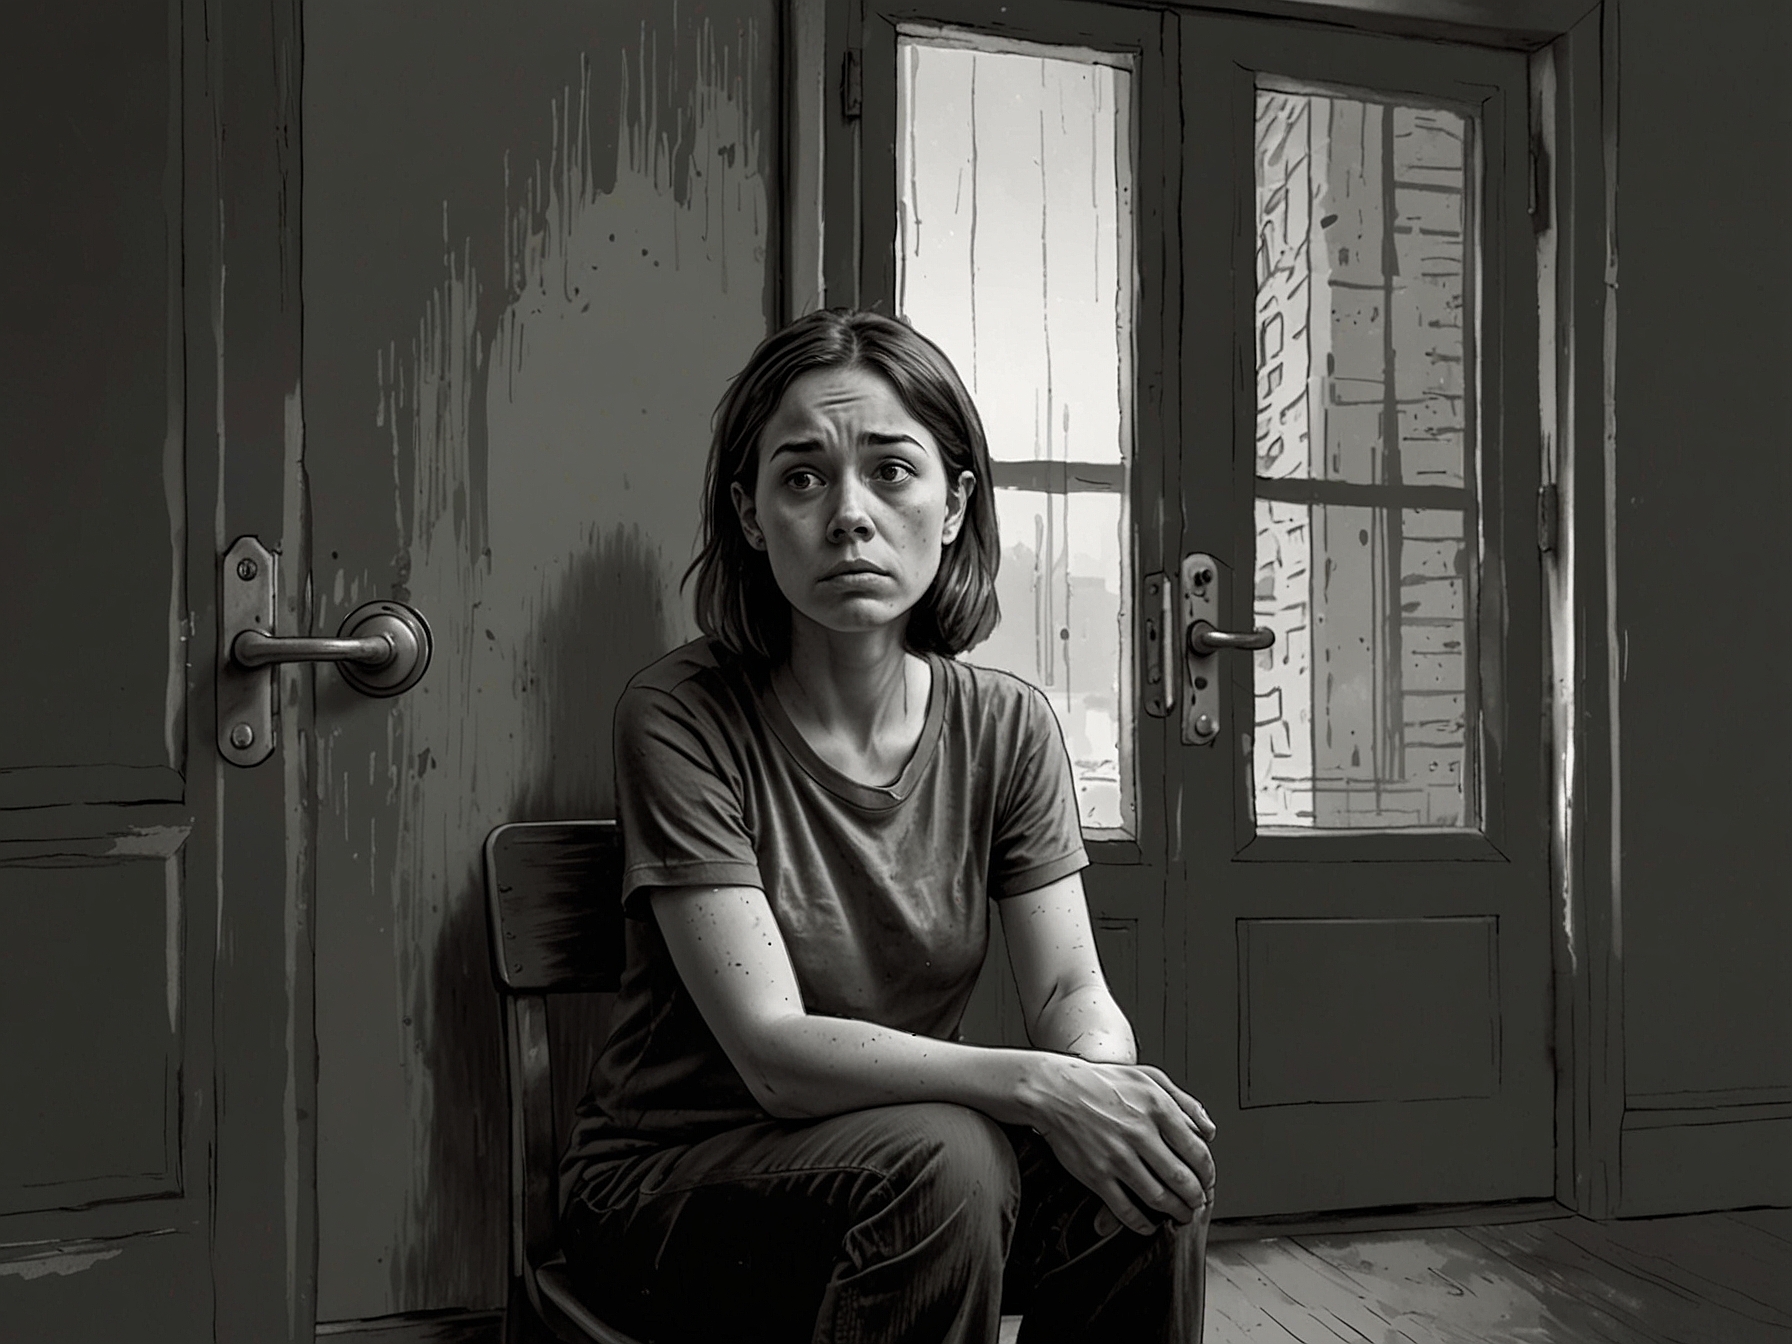 A concerned apartment resident sits by her door, looking anxious after hearing three knocks, illustrating the unsettling impact of the building's three-knock rule.